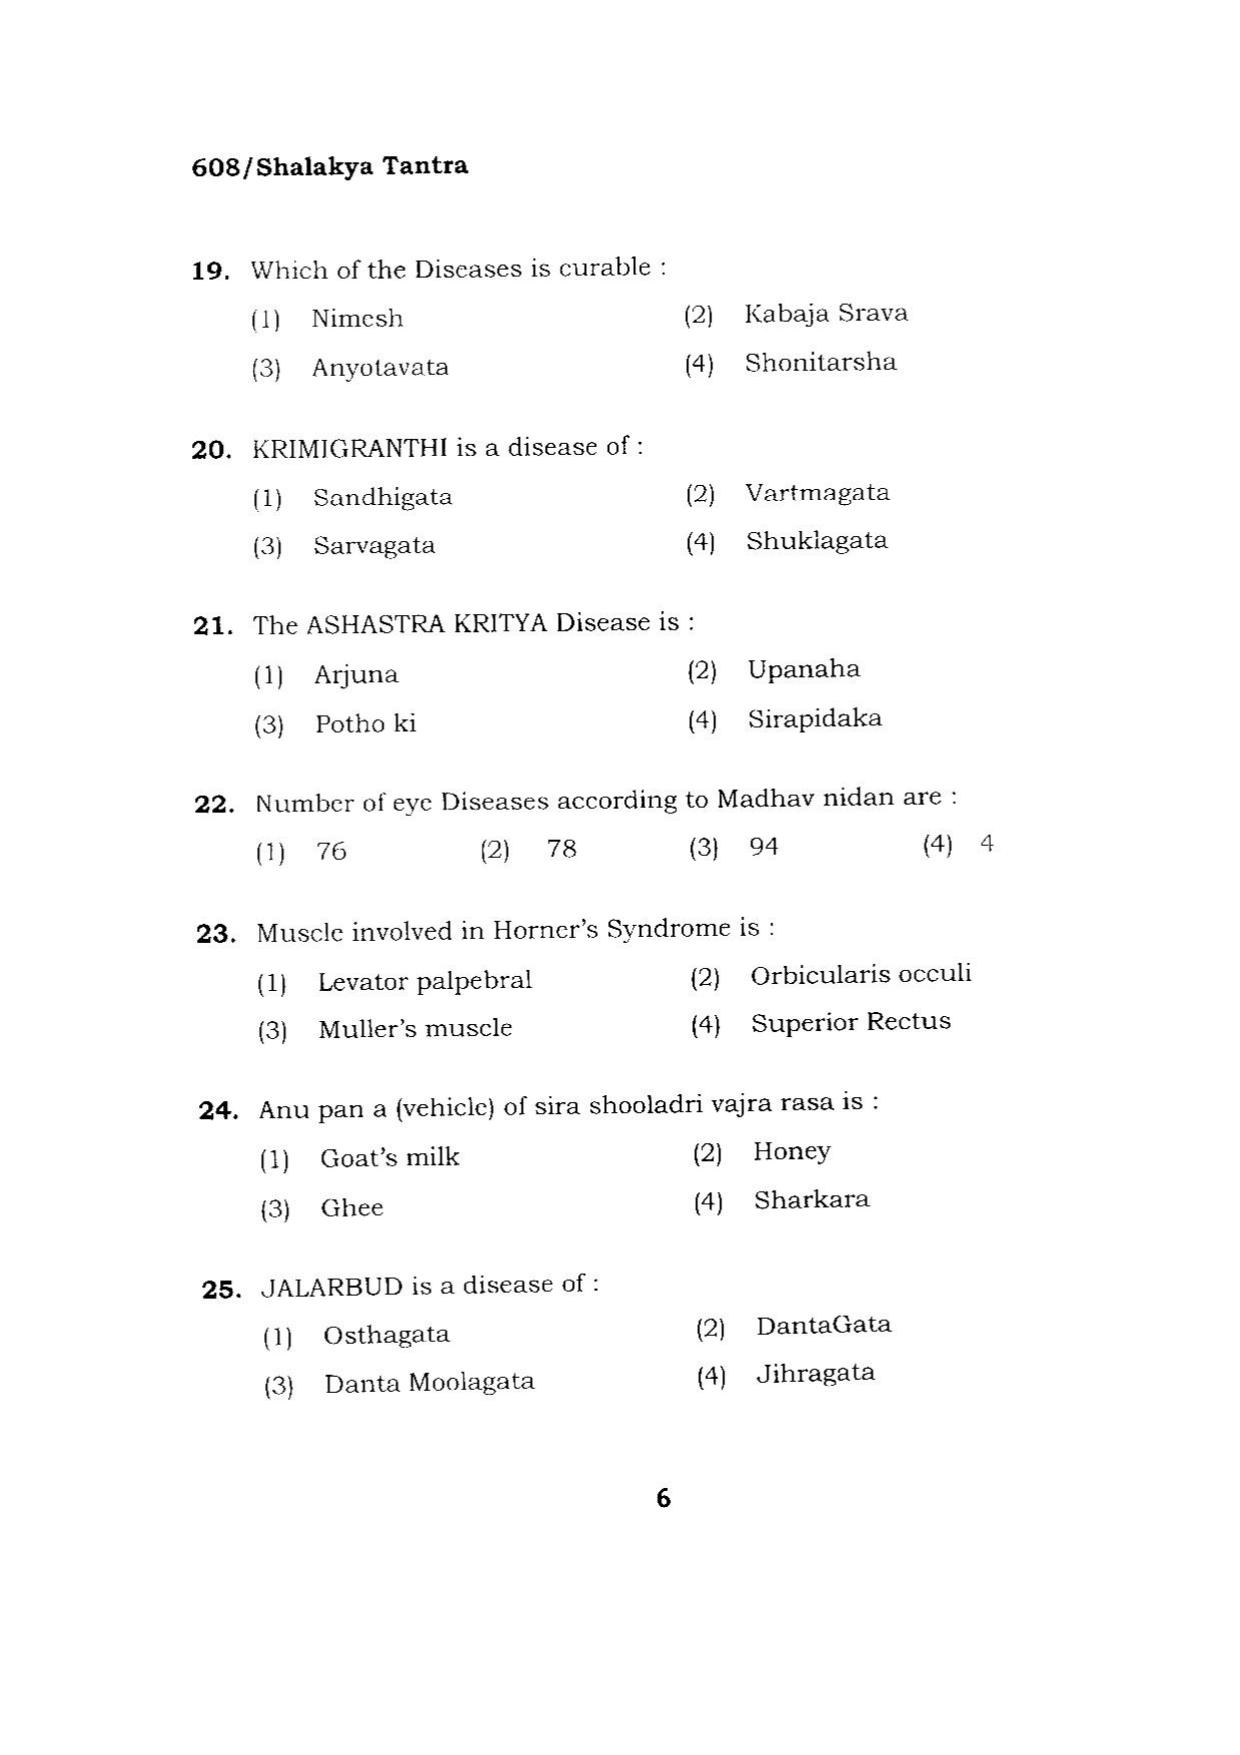 BHU RET SHALAKYA TANTRA 2015 Question Paper - Page 6